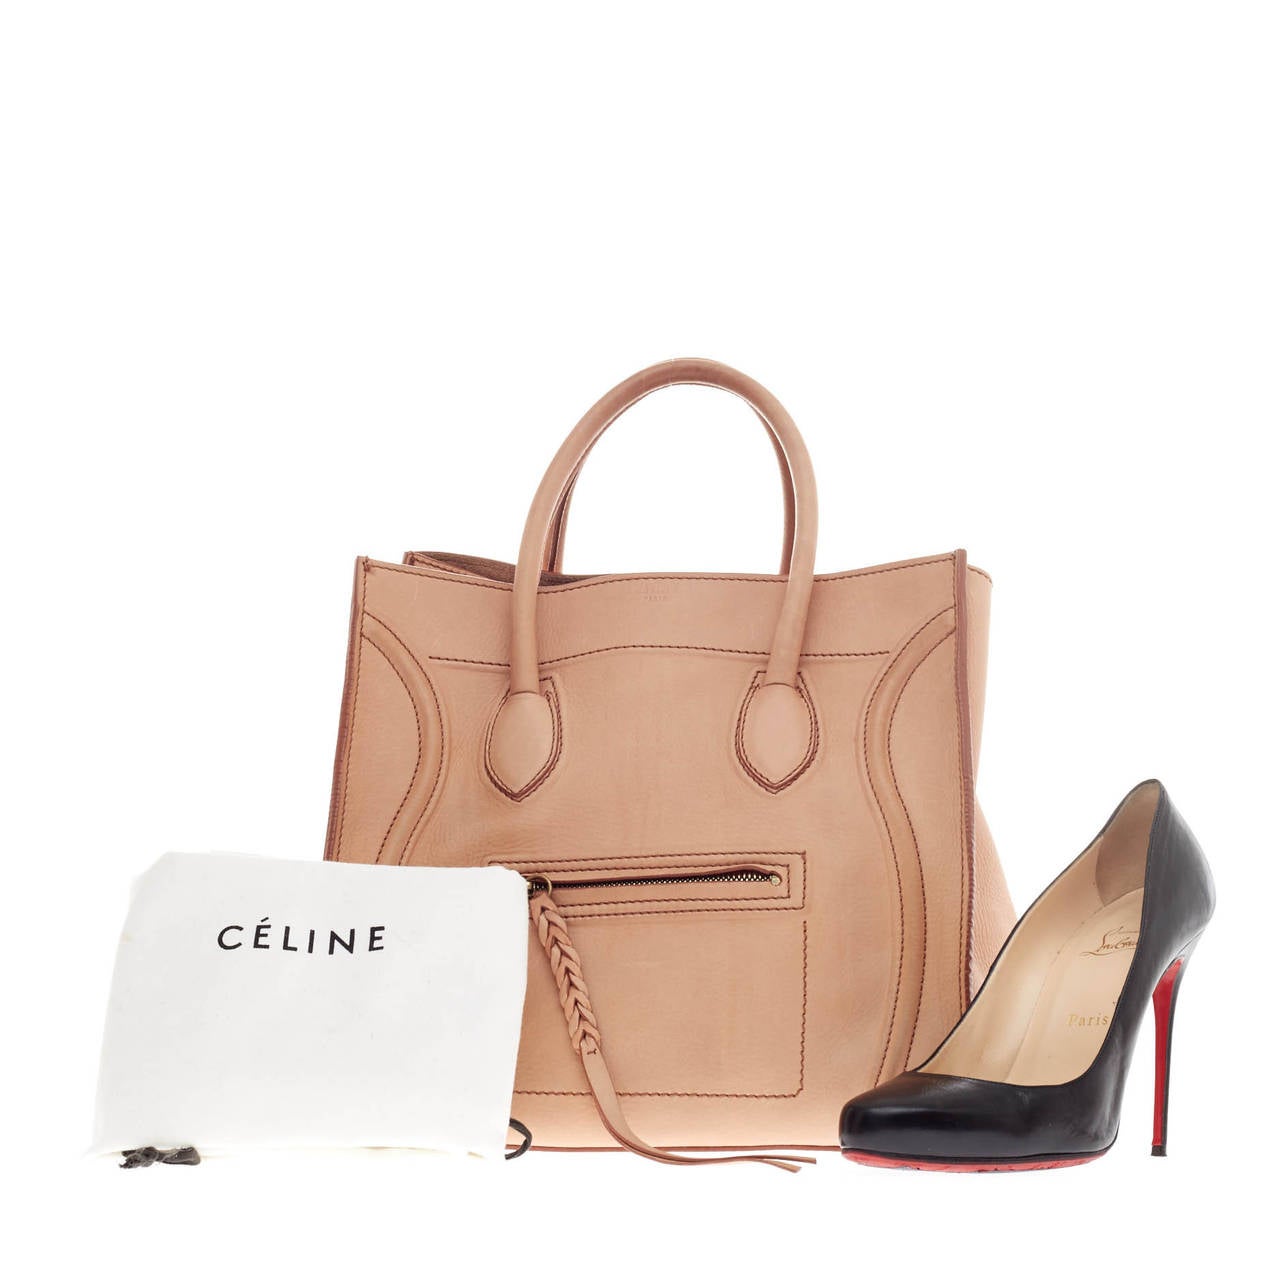 This authentic Celine Phantom Grainy Leather in size Medium is one of the most sought-after bags beloved by fashionistas. Crafted from blush pebbled leather, this oversized minimalist tote features a braided zipper pull, dual rolled handles, matte